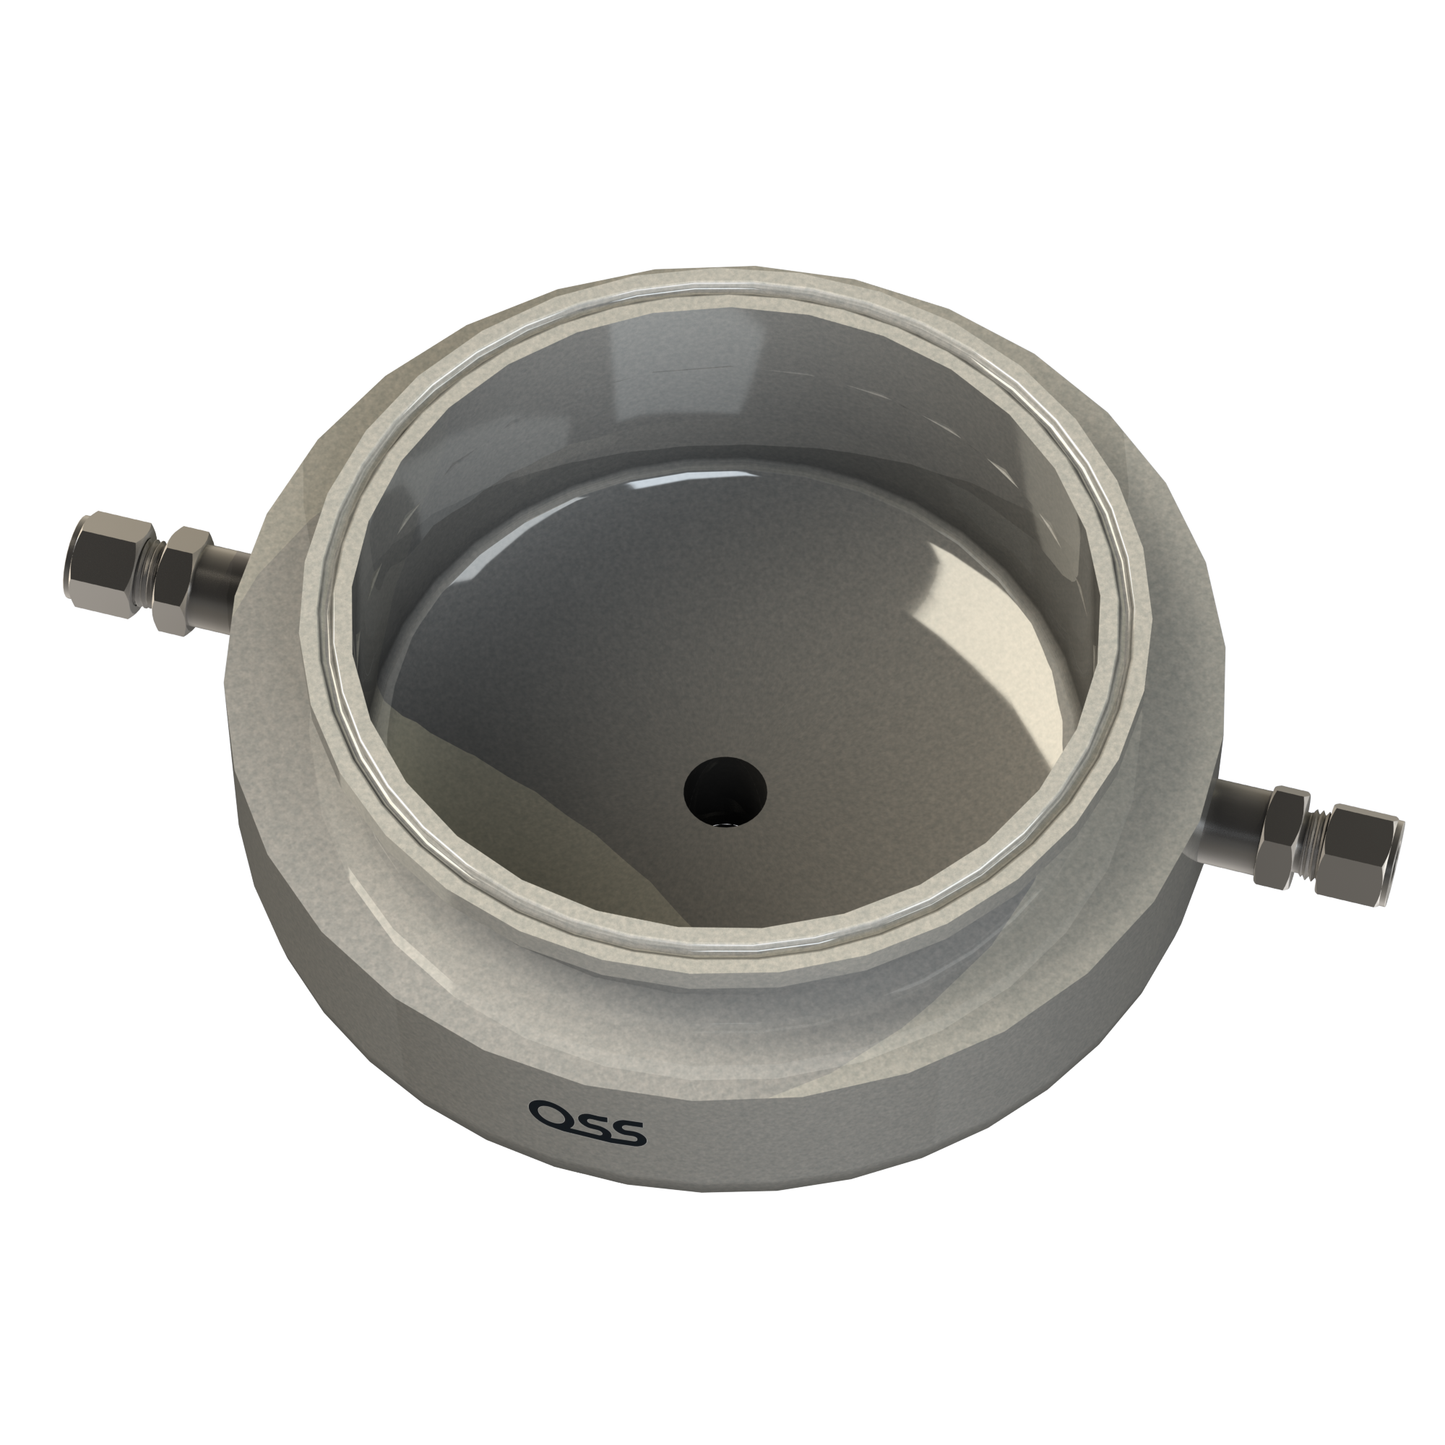 Jacketed Round Bottom Collection Base w/ 3/8" Compression Ports